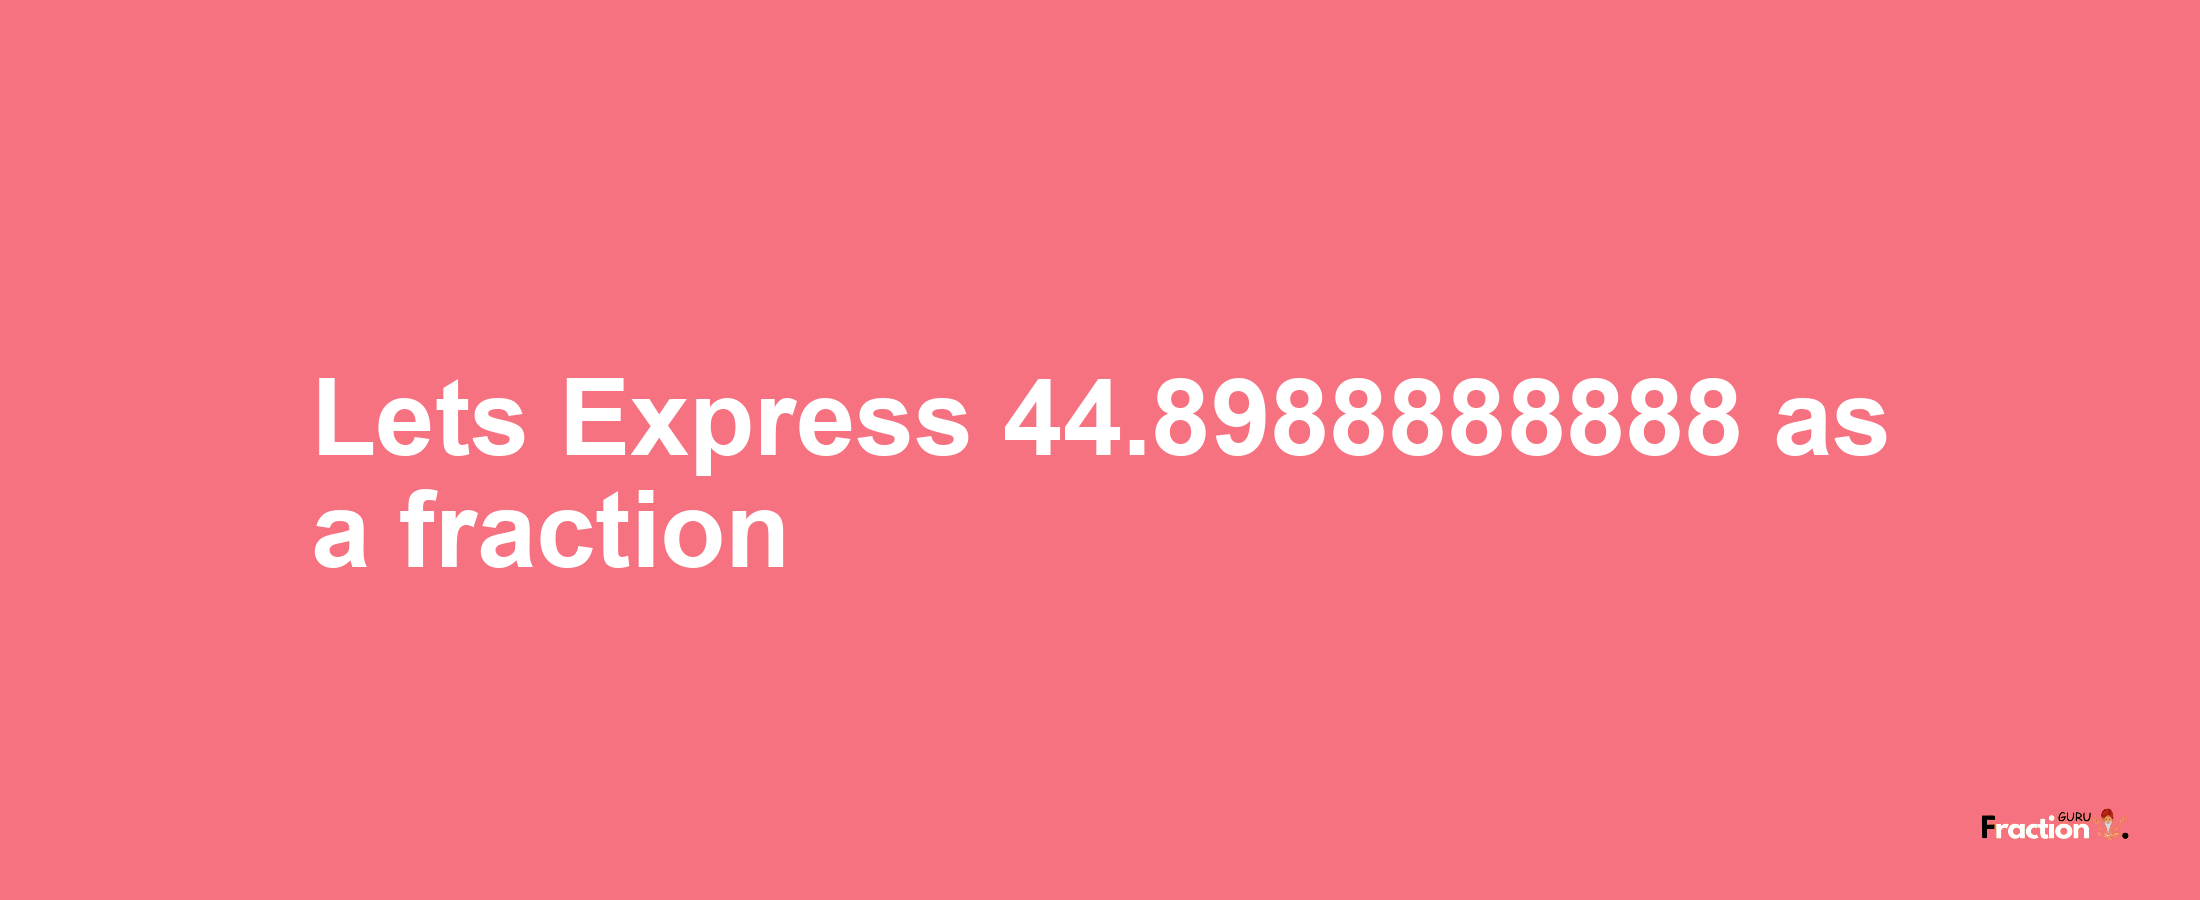 Lets Express 44.8988888888 as afraction